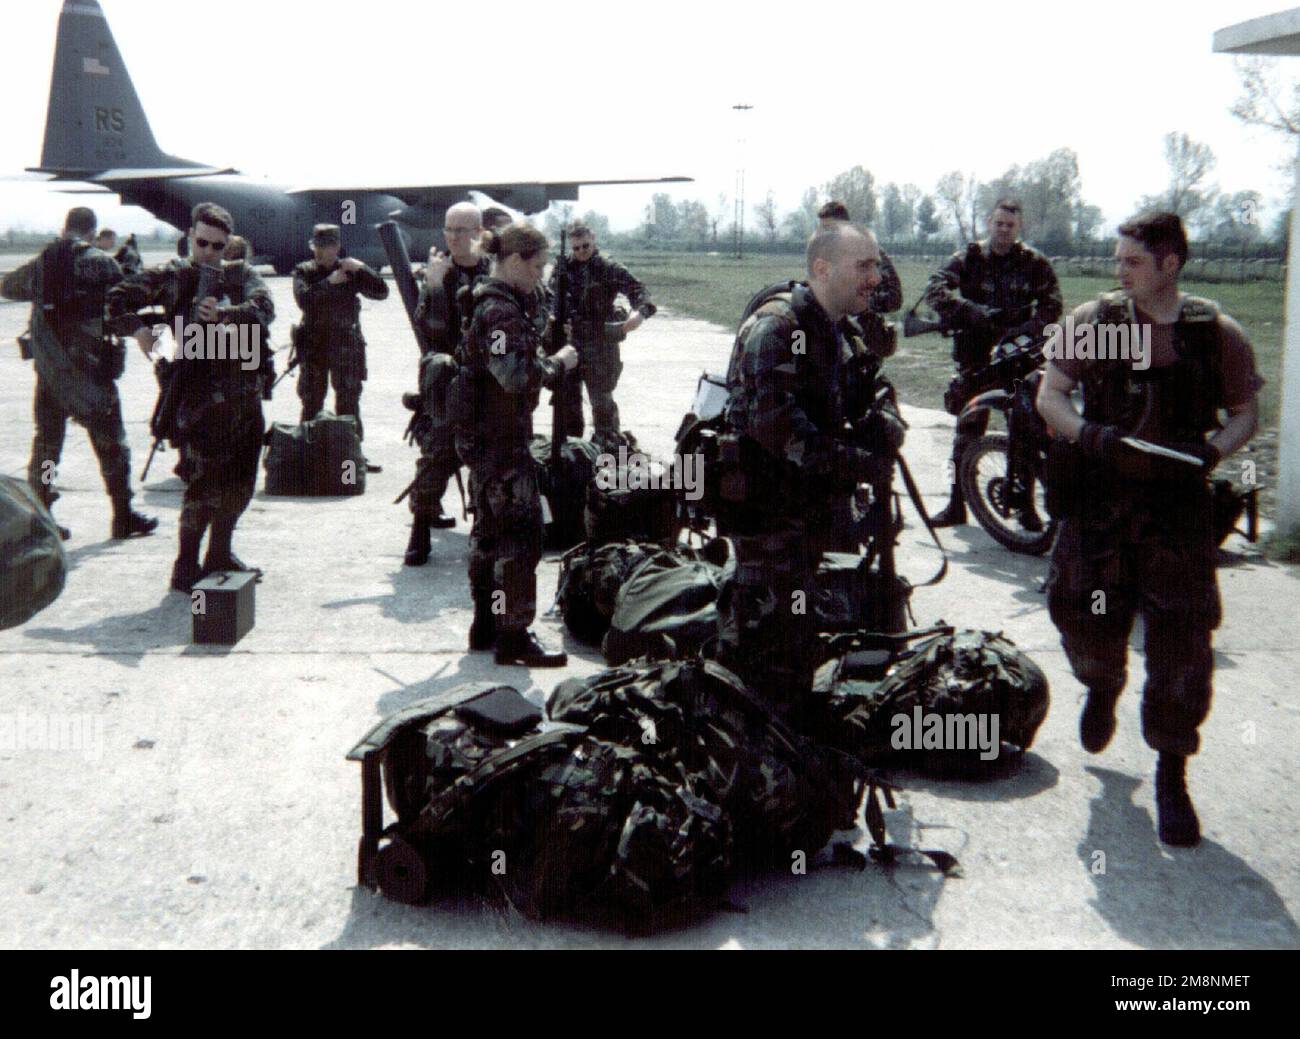 Security forces from the 86th Contingency Response Group at Ramstein Air Base, Germany, arrive in Tirana, Albania, on April 10, 1999, in support of Operation Sustain Hope the U.S. effort to bring in food, water, medicine, relief supplies, and to establish camps for the refugees (all not shown) fleeing from the Former Republic of Yugoslavia into Albania and Macedonia. Subject Operation/Series: SUSTAIN HOPE Base: Tirana Country: Albania (ALB) Stock Photo